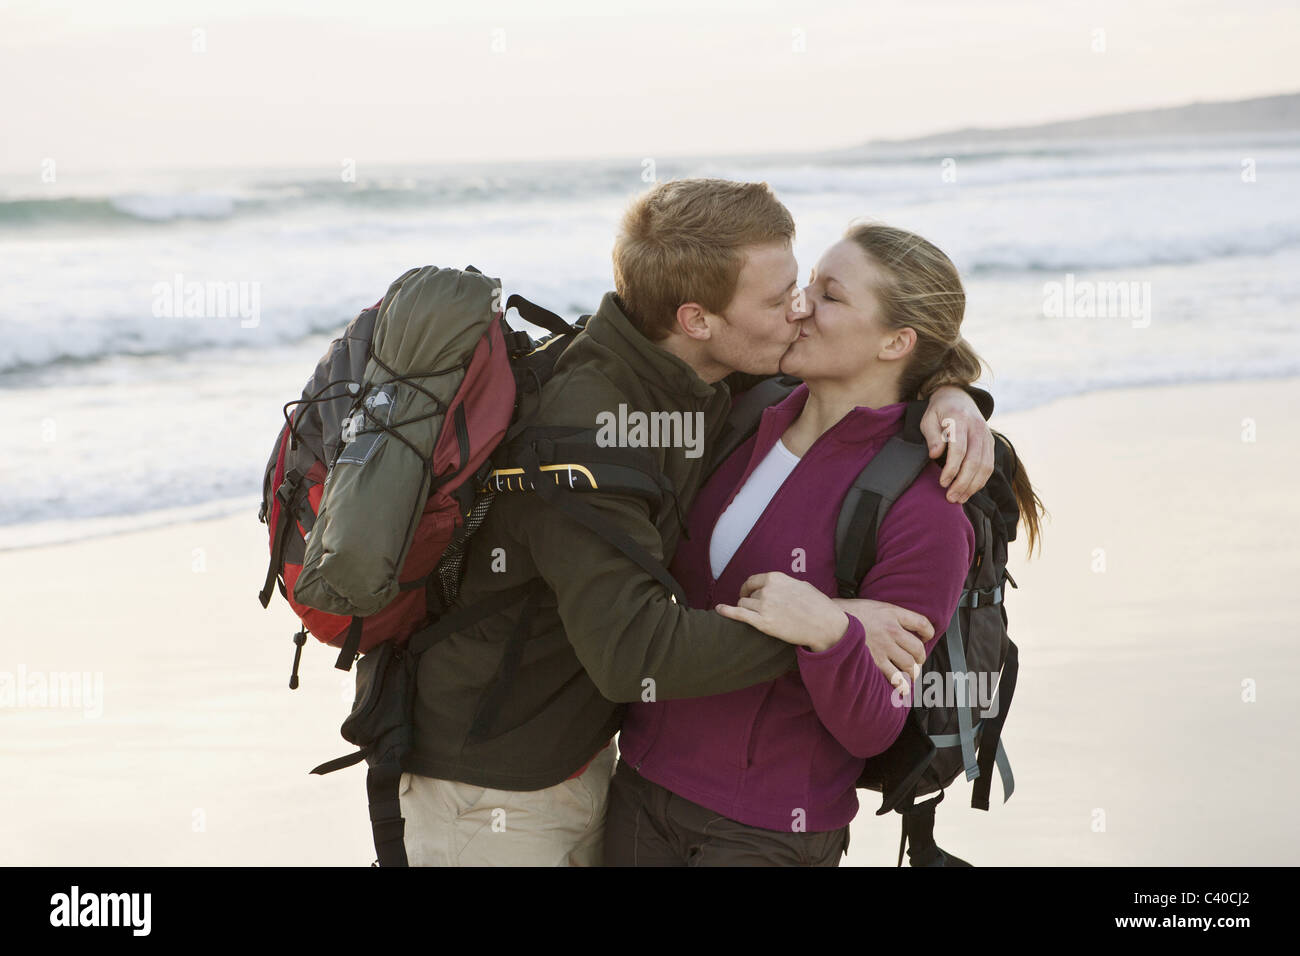 Backpacking couple kissing at beach Banque D'Images